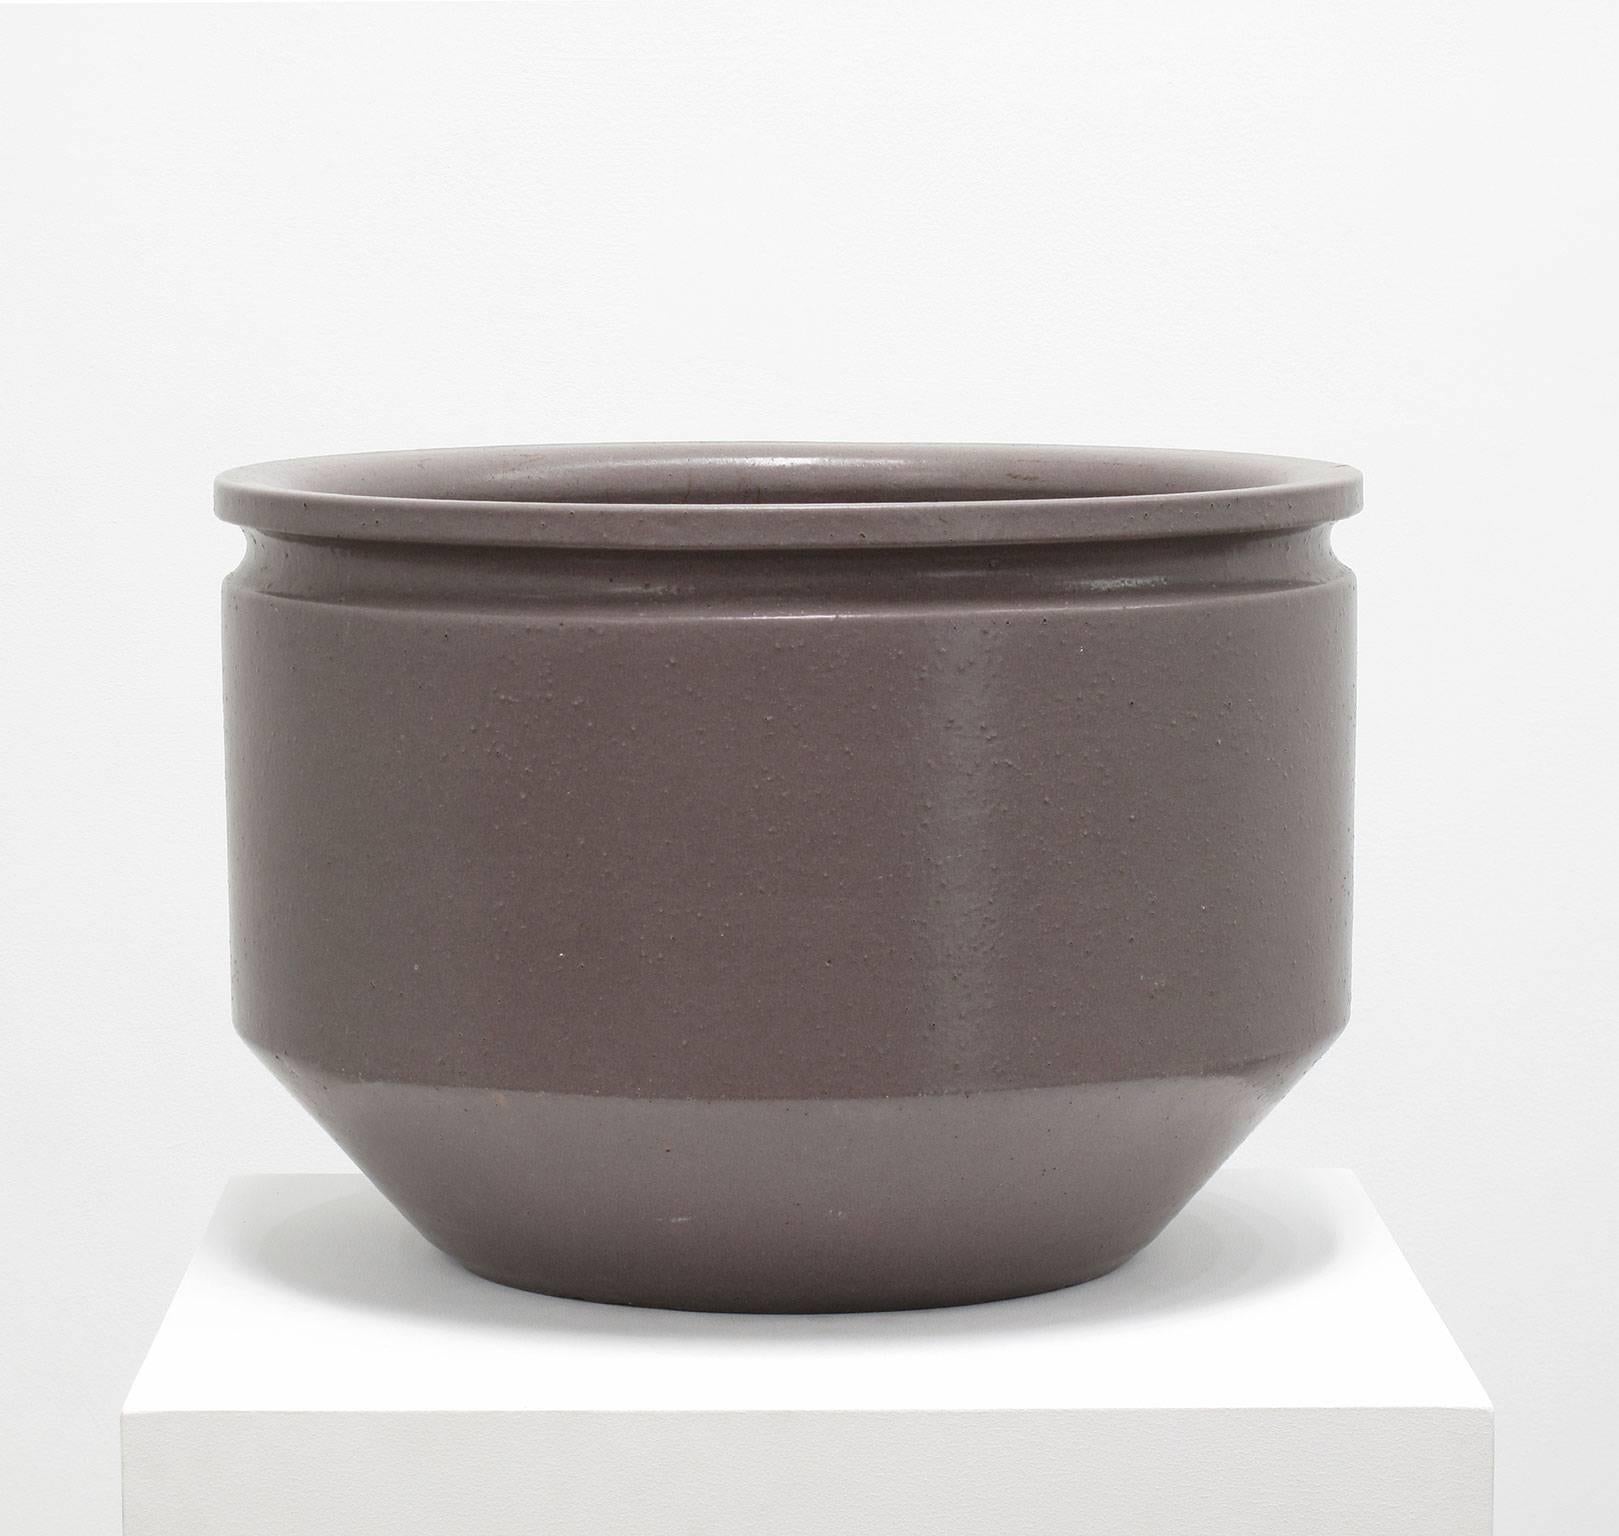 David Cressey and Robert Maxwell
Stoneware, glazed lavender, 1970s
Earthgender Ceramics
Los Angeles, California

Measurements in inches: 13 high x 18.5 diameter